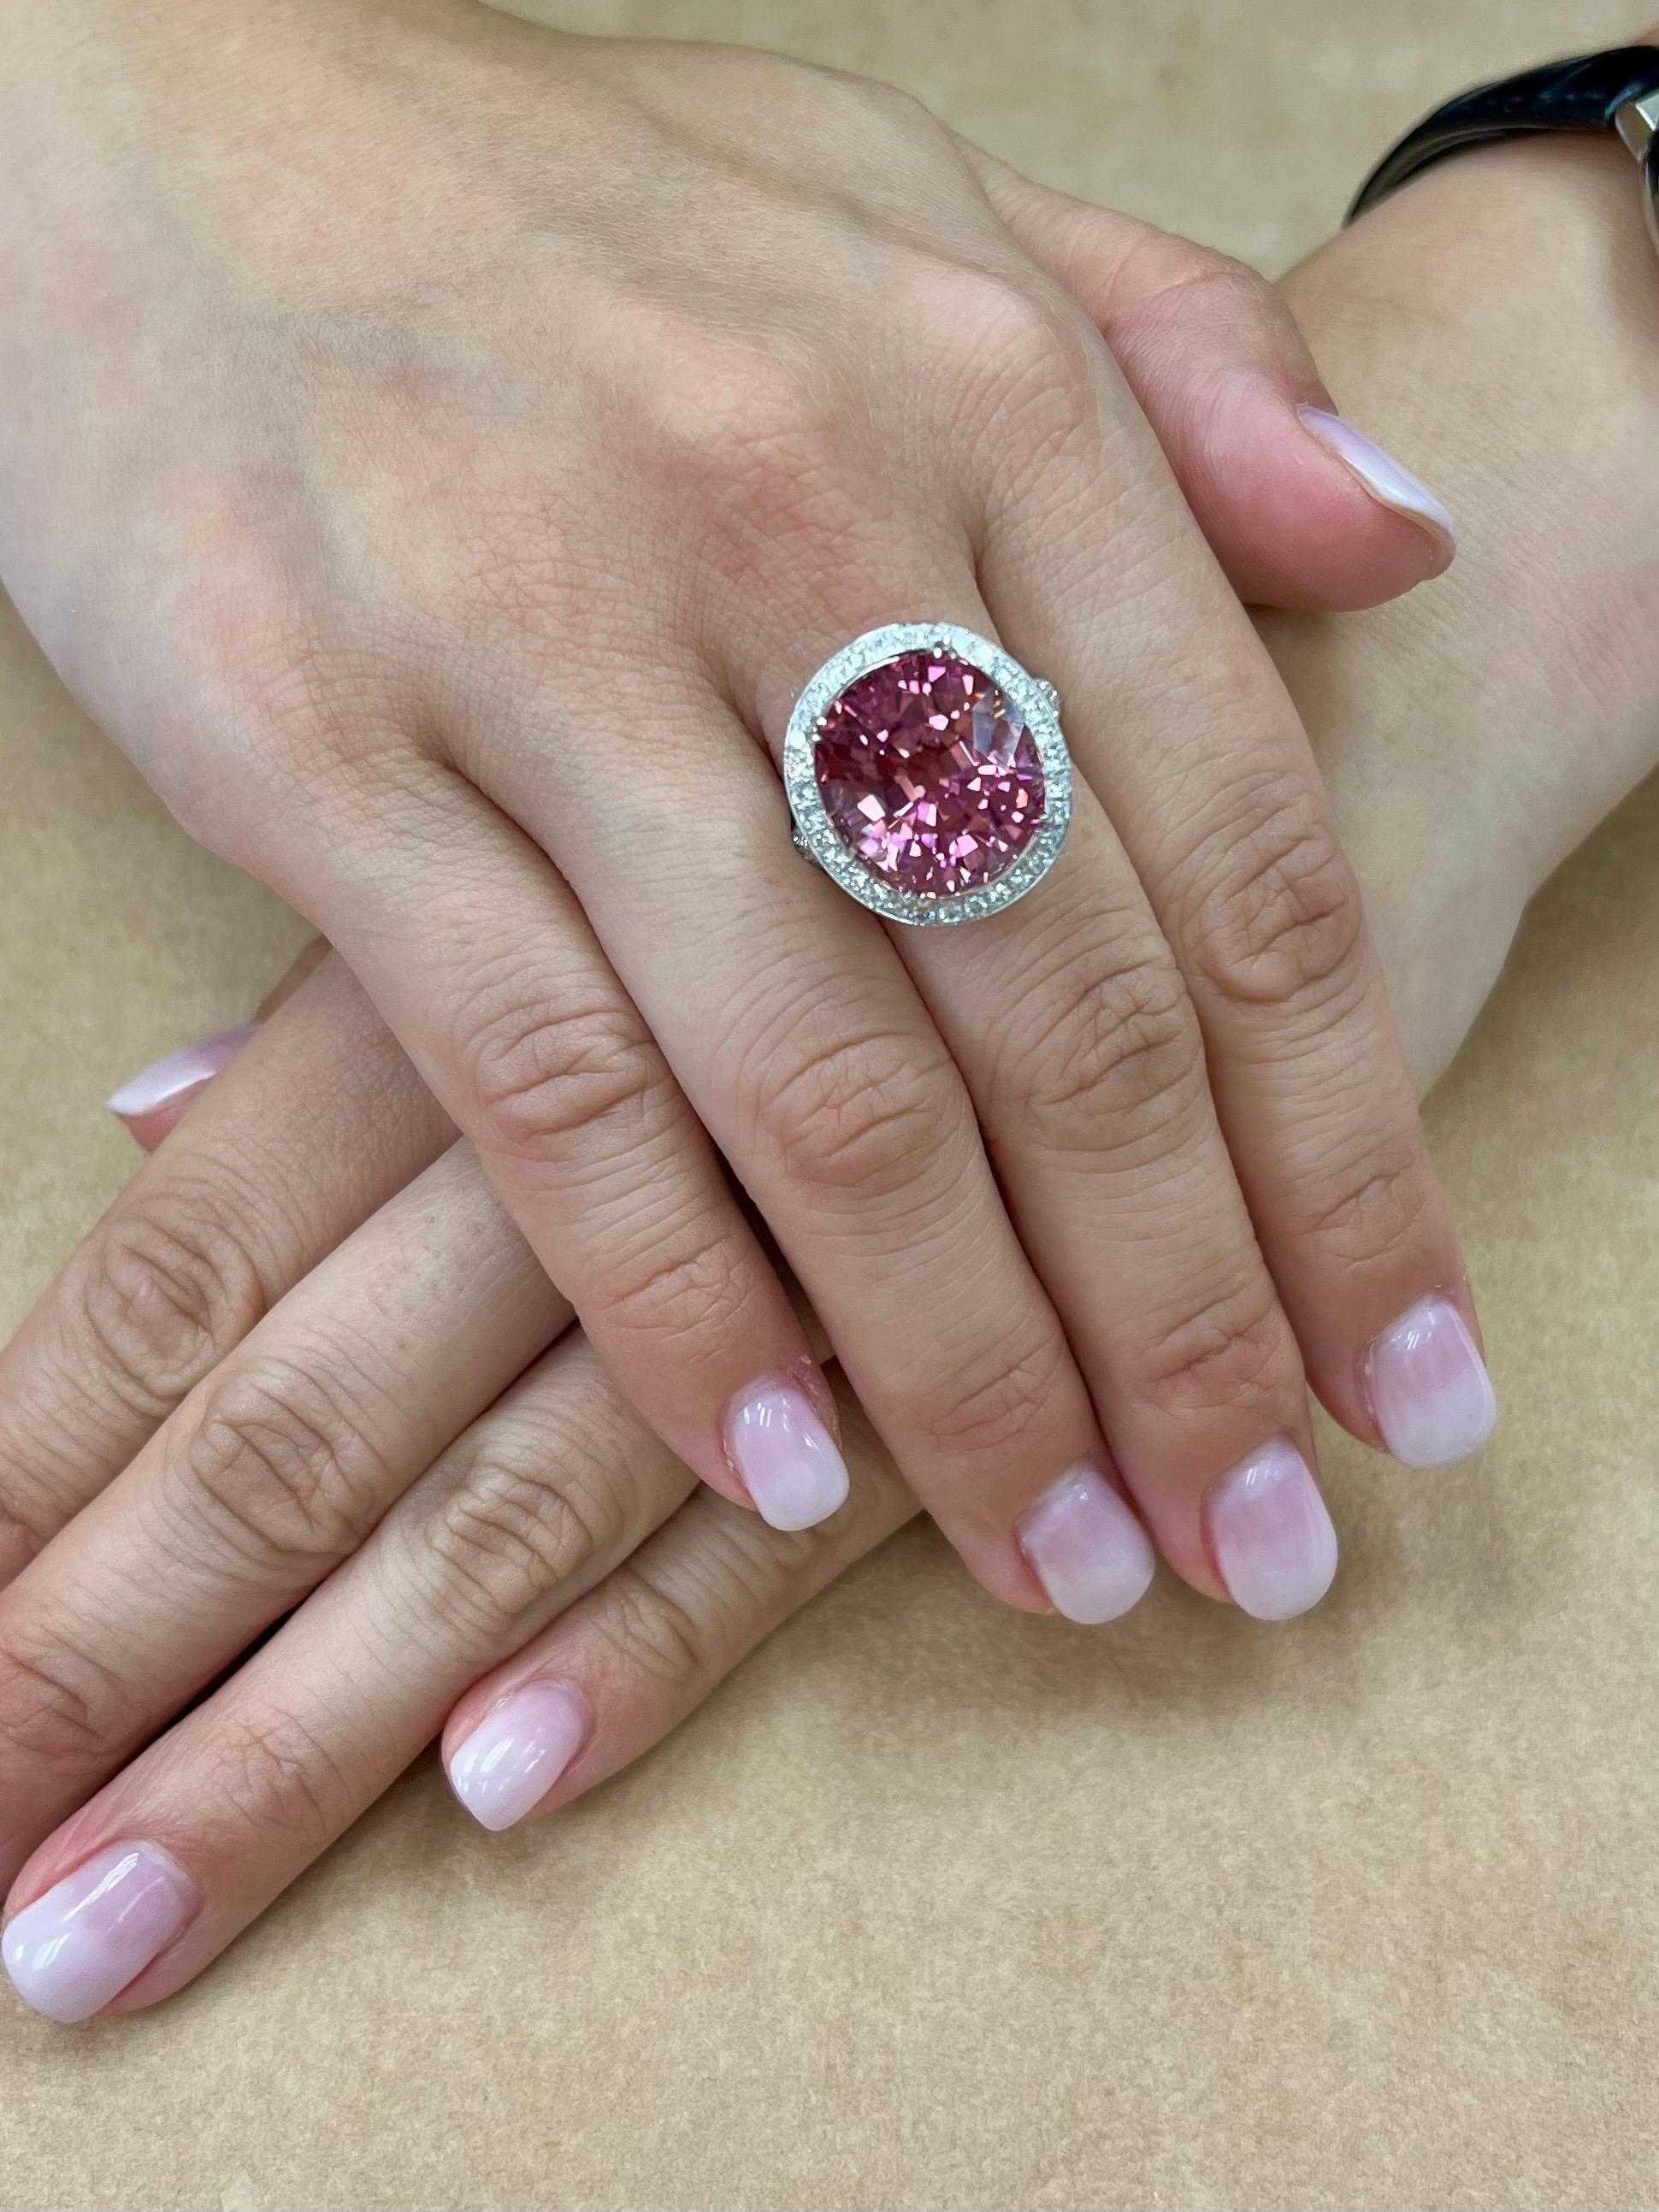 Please check out the HD video! Here is a large oversized 17+ cts pink tourmaline ring with 2.60cts of white diamonds. This ring will defiantly make a statement. The color really 